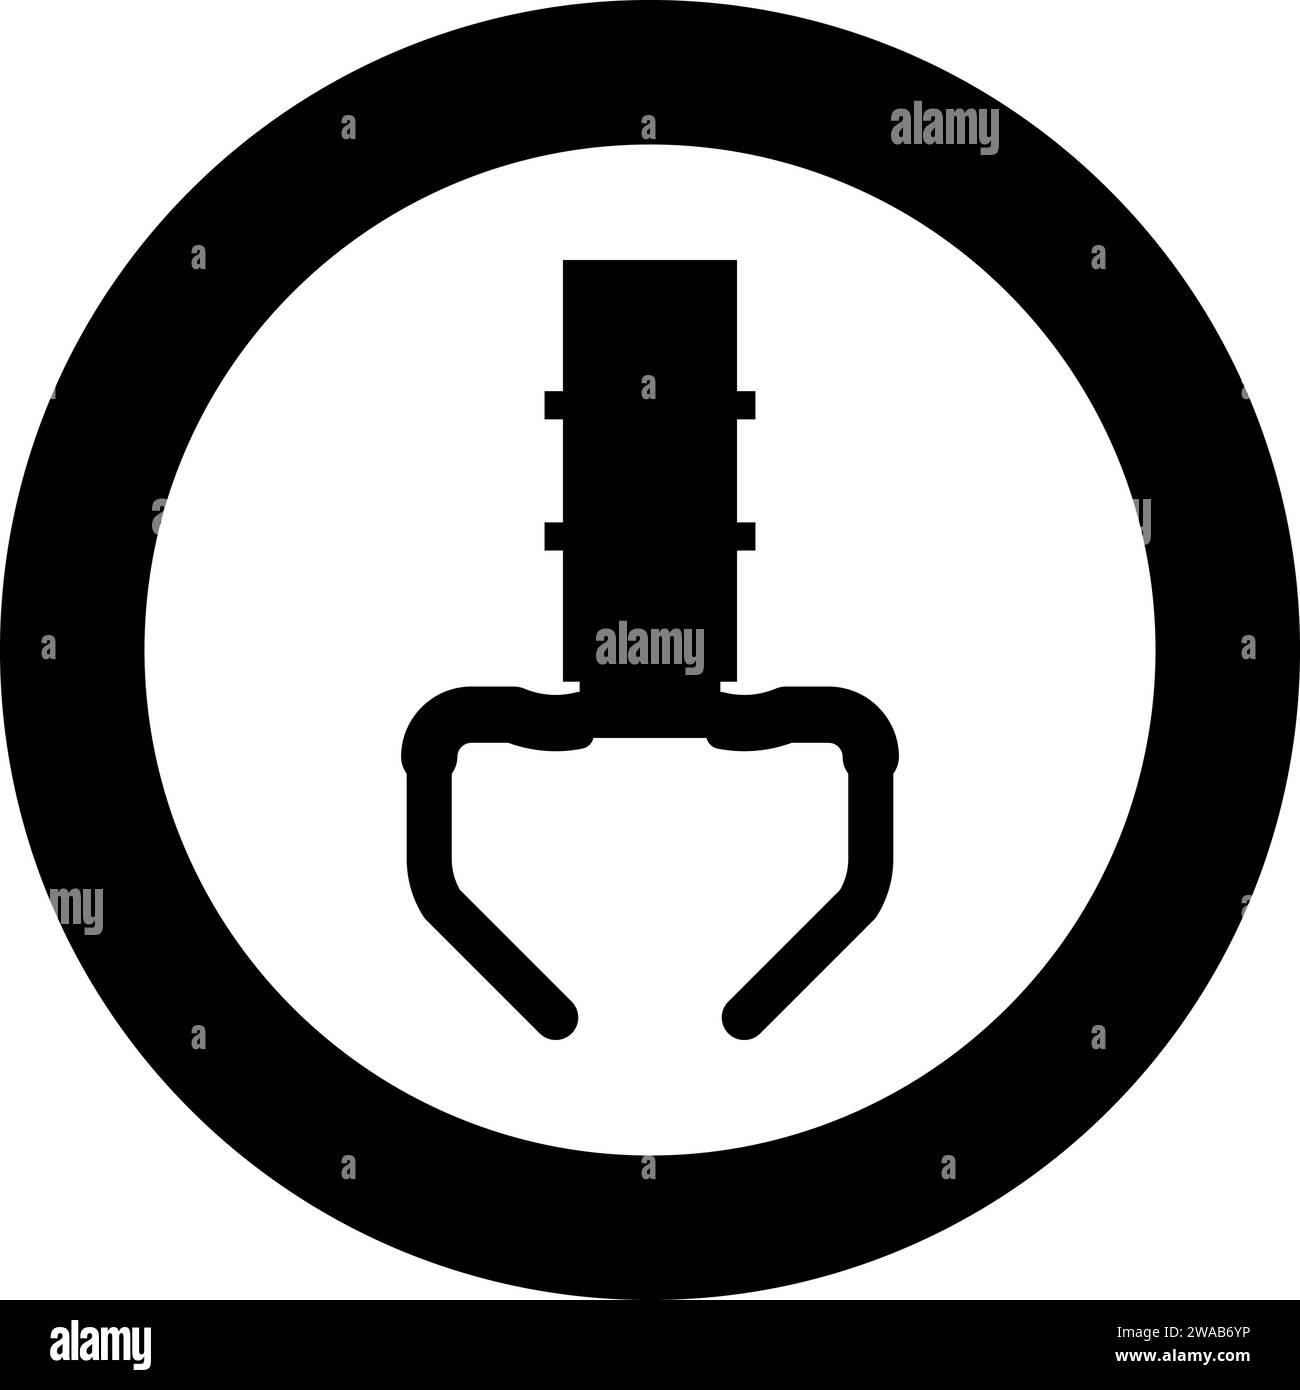 Prize toy manipulator iron hook crane claw picker icon in circle round black color vector illustration image solid outline style simple Stock Vector